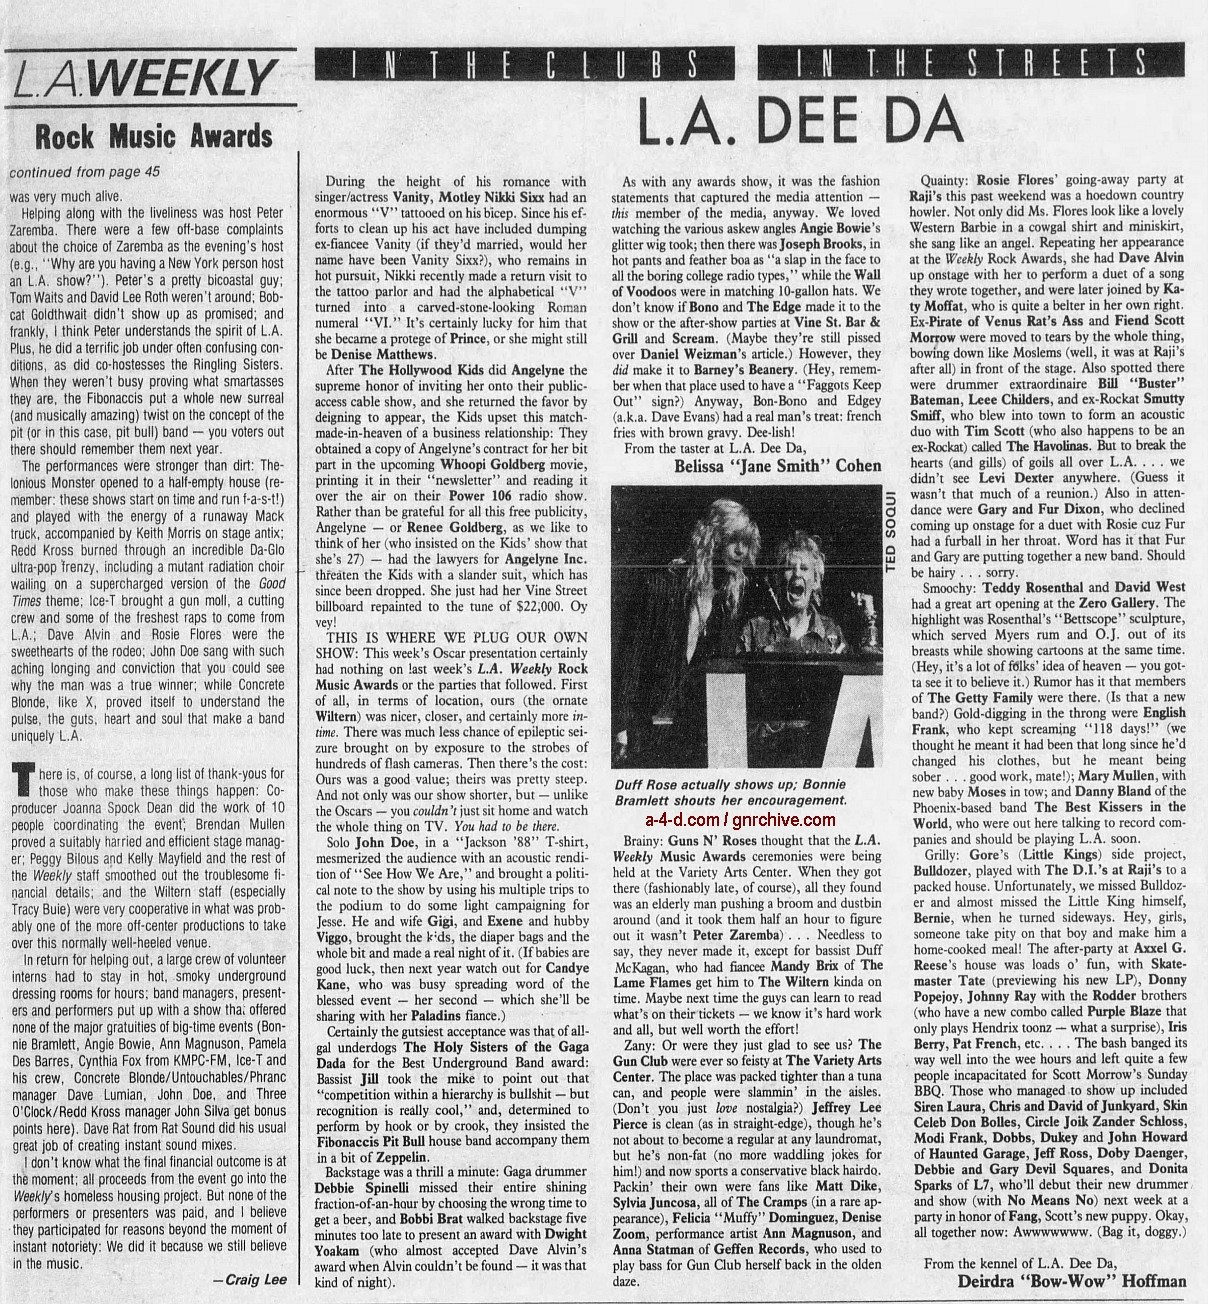 1988.04.15 - L.A. Weekly - L.A. Weekly Rock Music Awards 1988_081